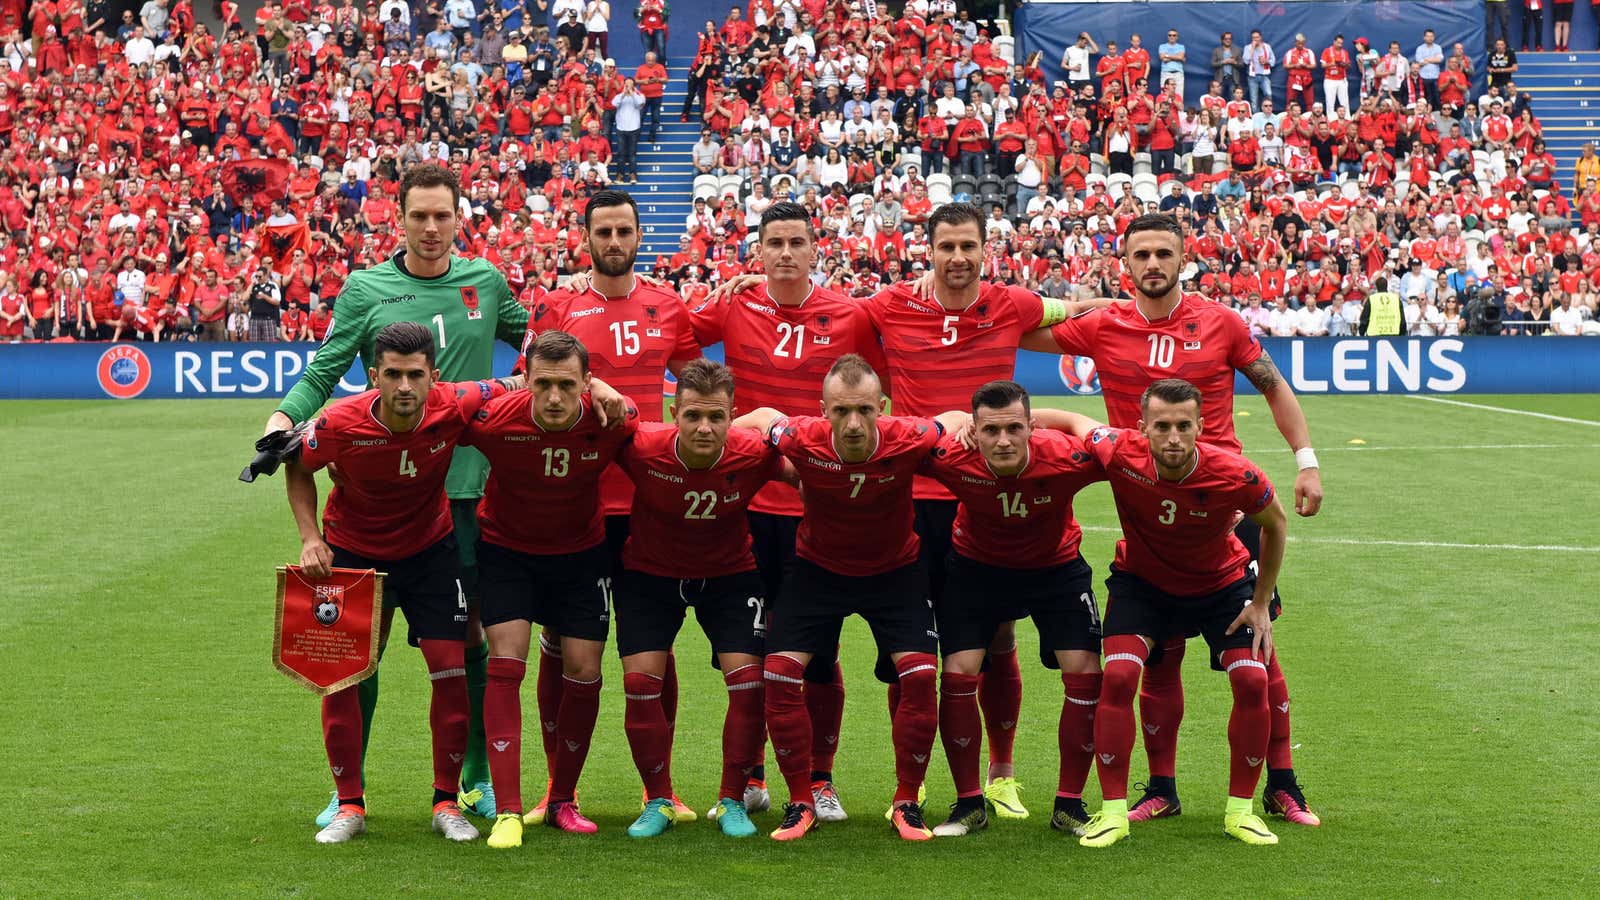 The Albanian national team has nine players born or raised in Switzerland.